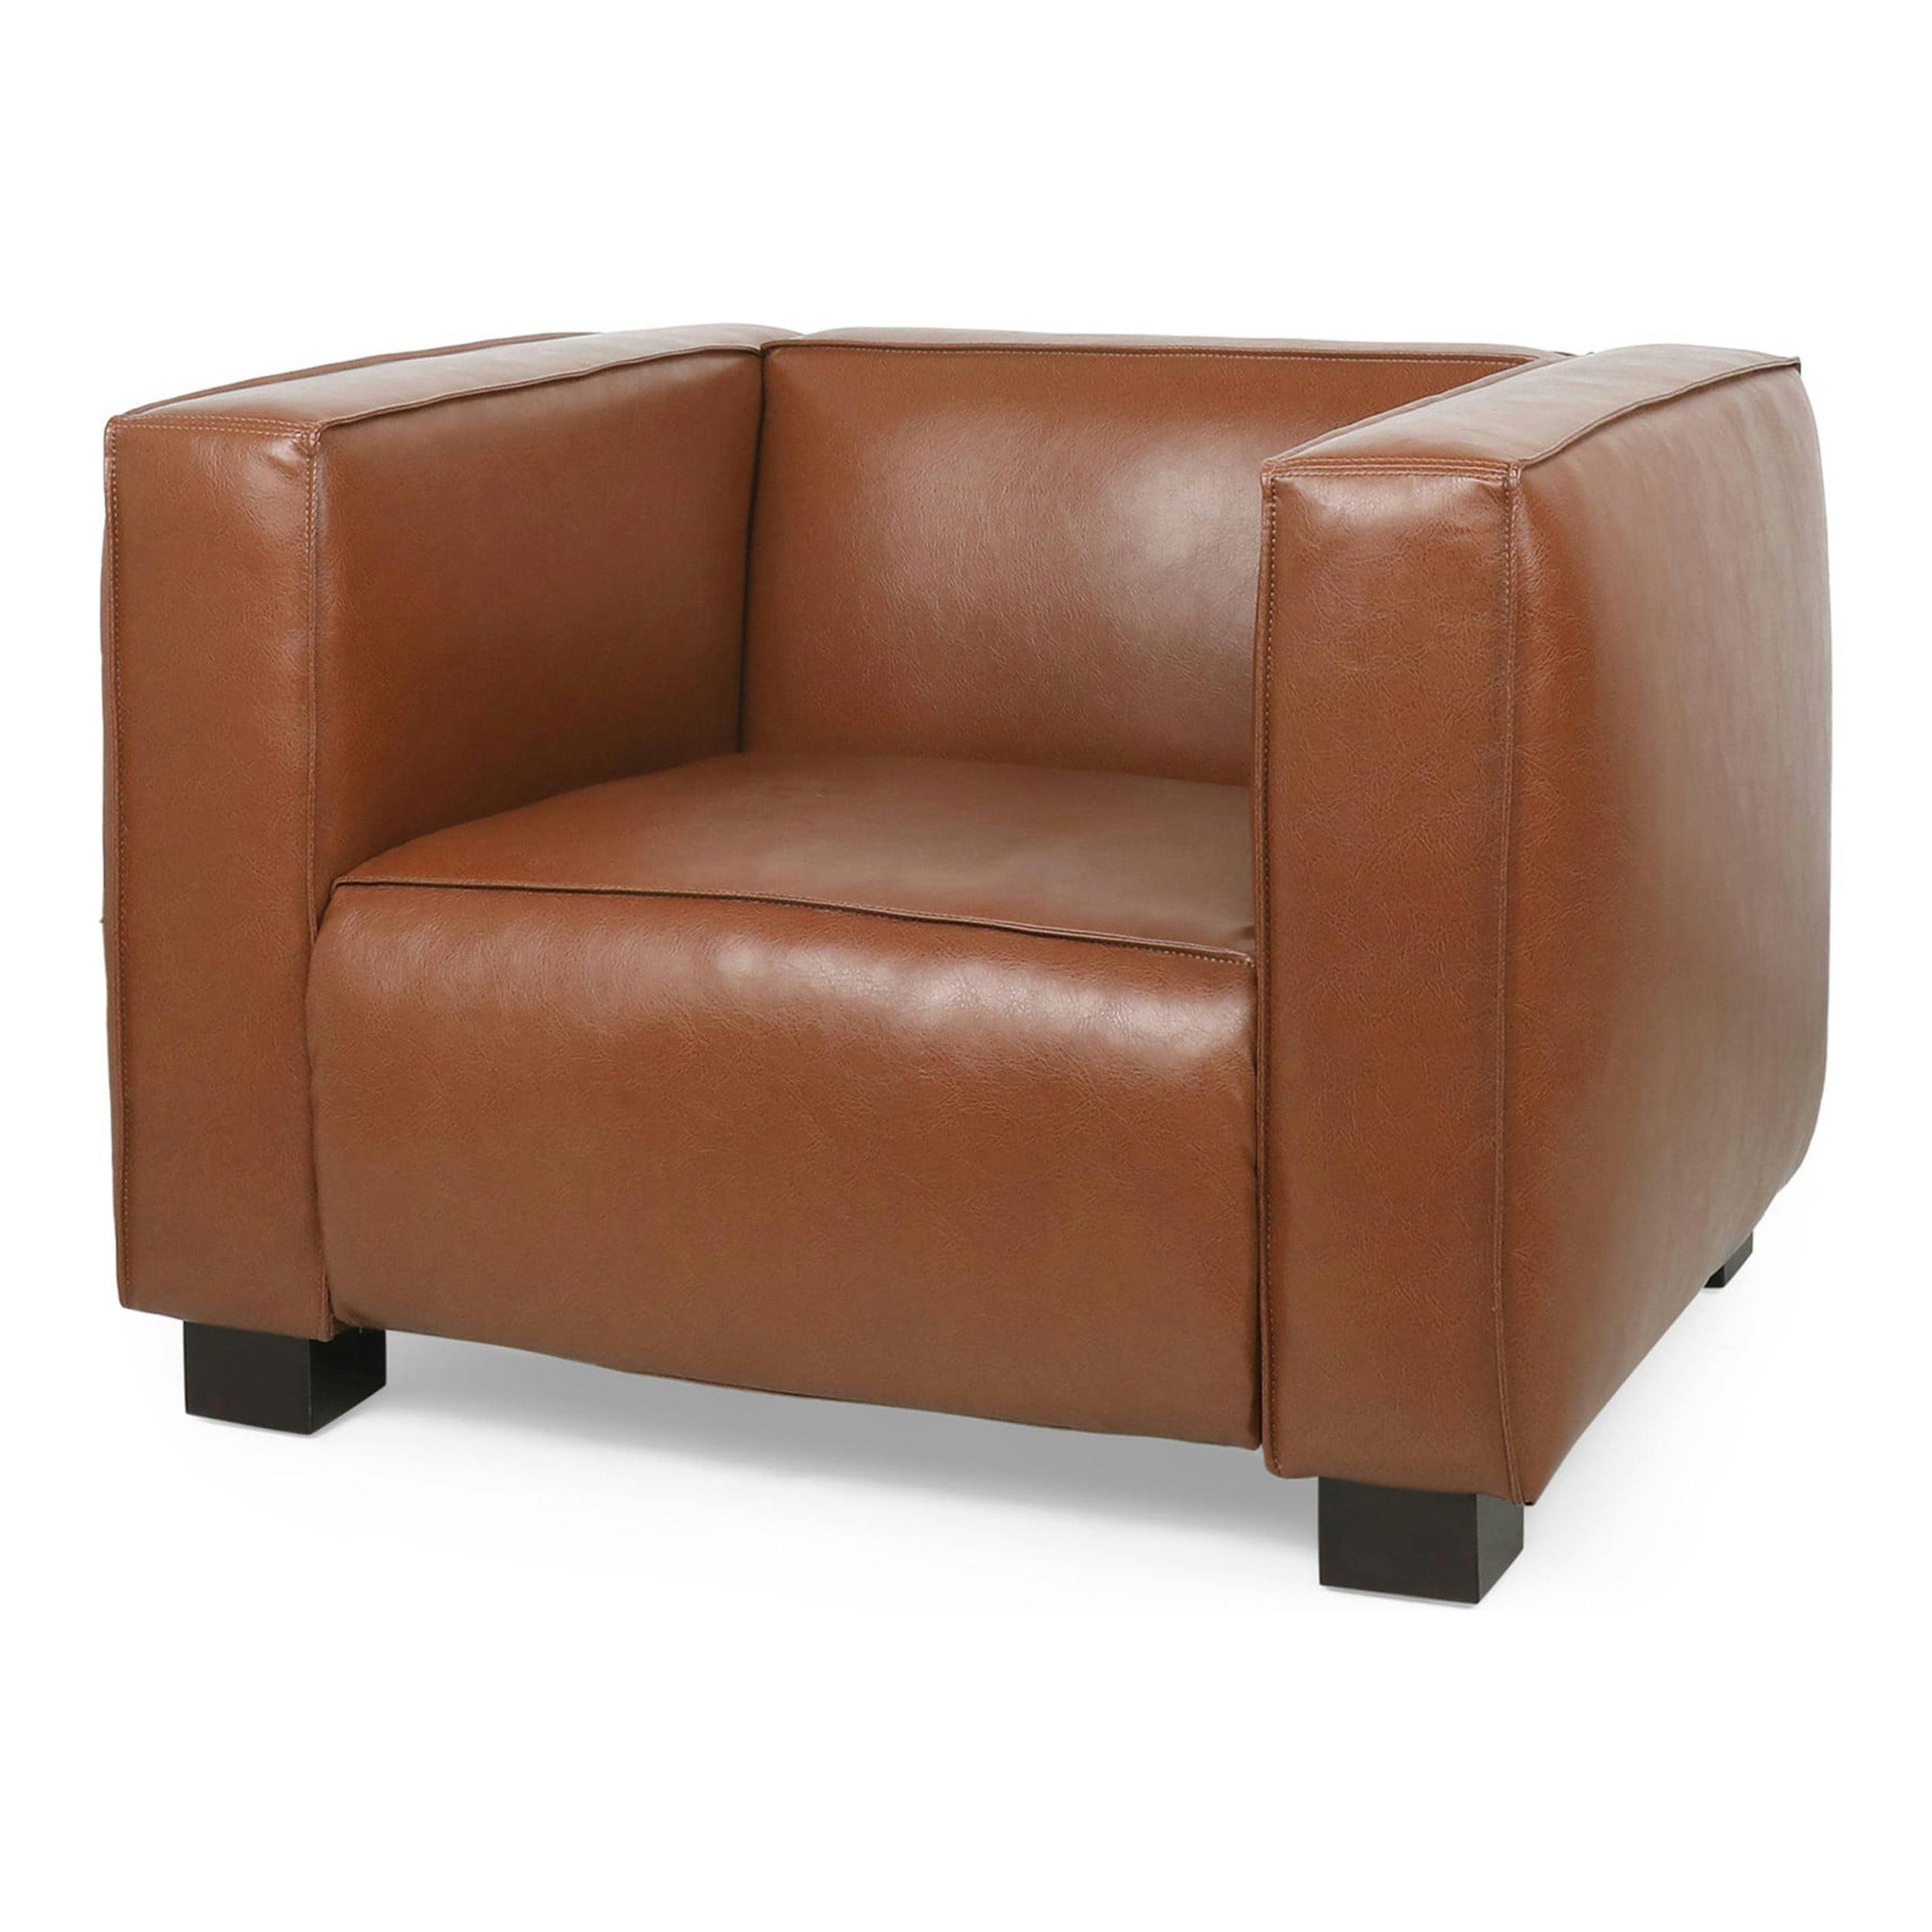 Cognac Brown Square Arm Faux Leather Club Chair with Dark Walnut Wood Legs